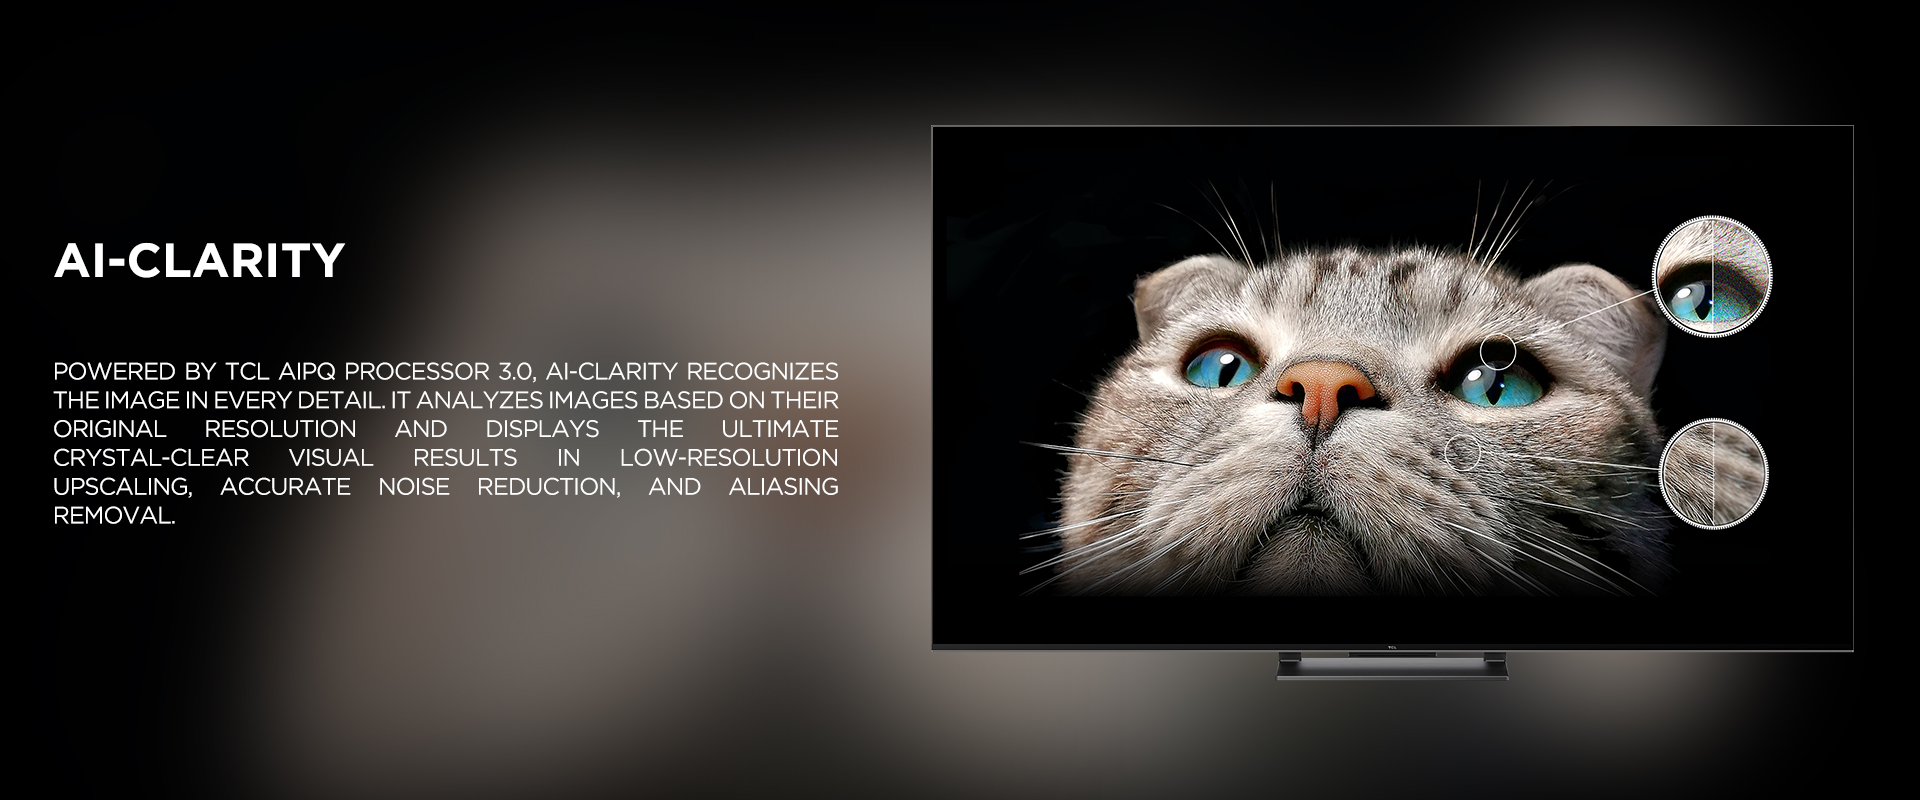 Ai-CLARITY - Powered by TCL AiPQ Processor 3.0, Ai-Clarity recognizes the image in every detail. It analyzes images based on their original resolution and displays the ultimate crystal-clear visual results in low-resolution upscaling, accurate noise reduction, and aliasing removal.
